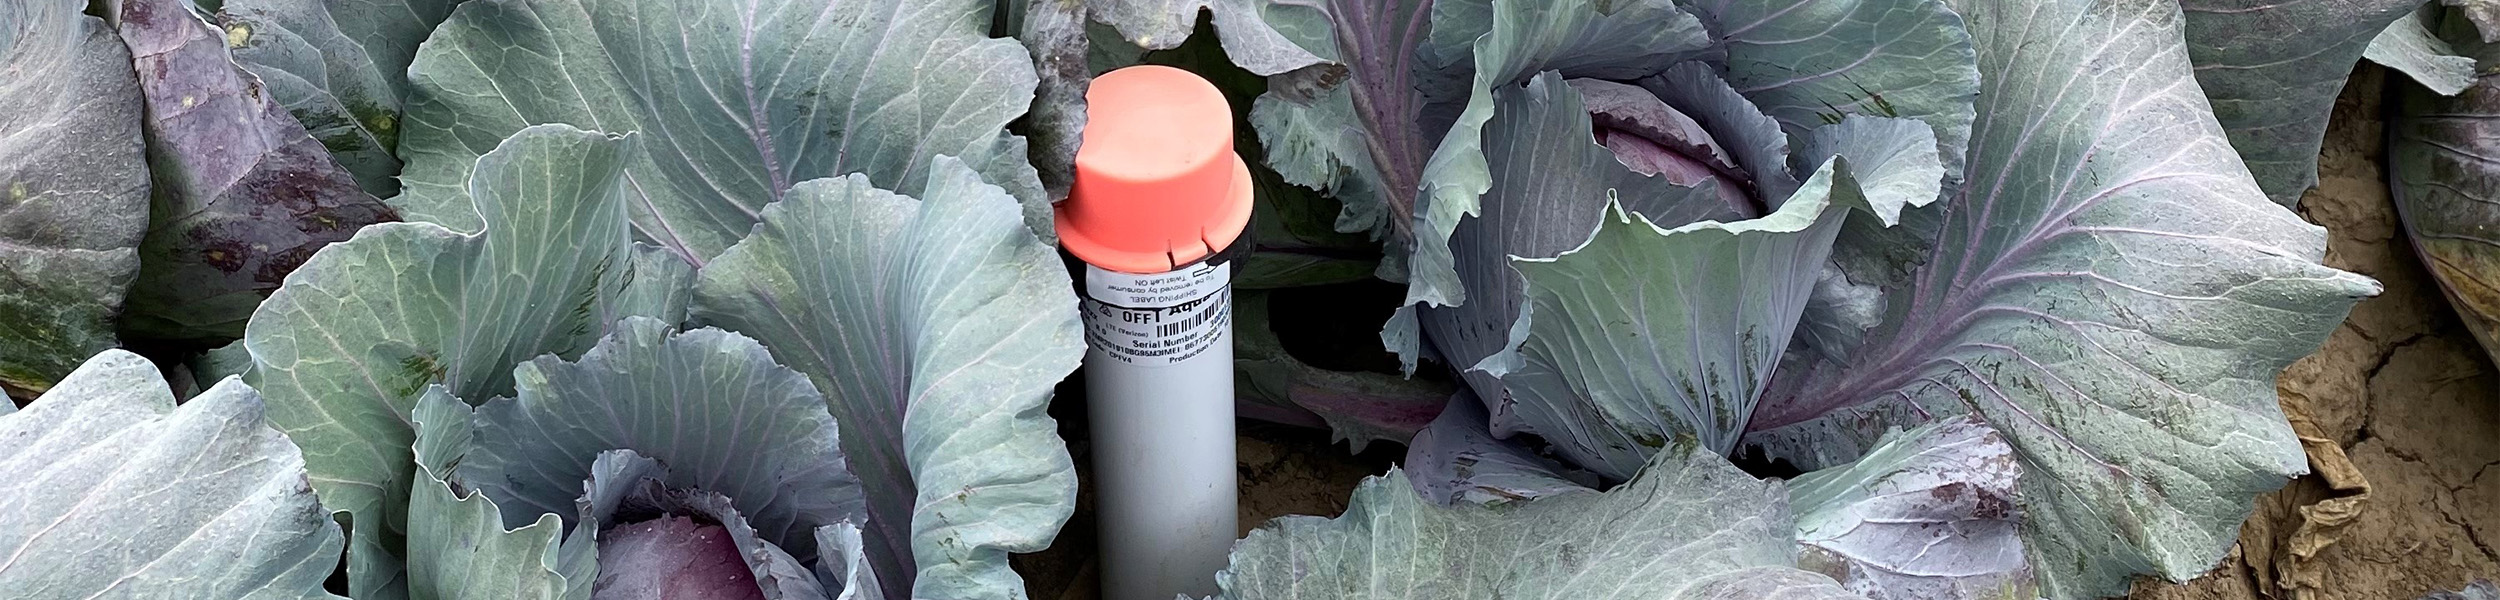 How to Take the Guesswork Out of Vegetable Crop Irrigation